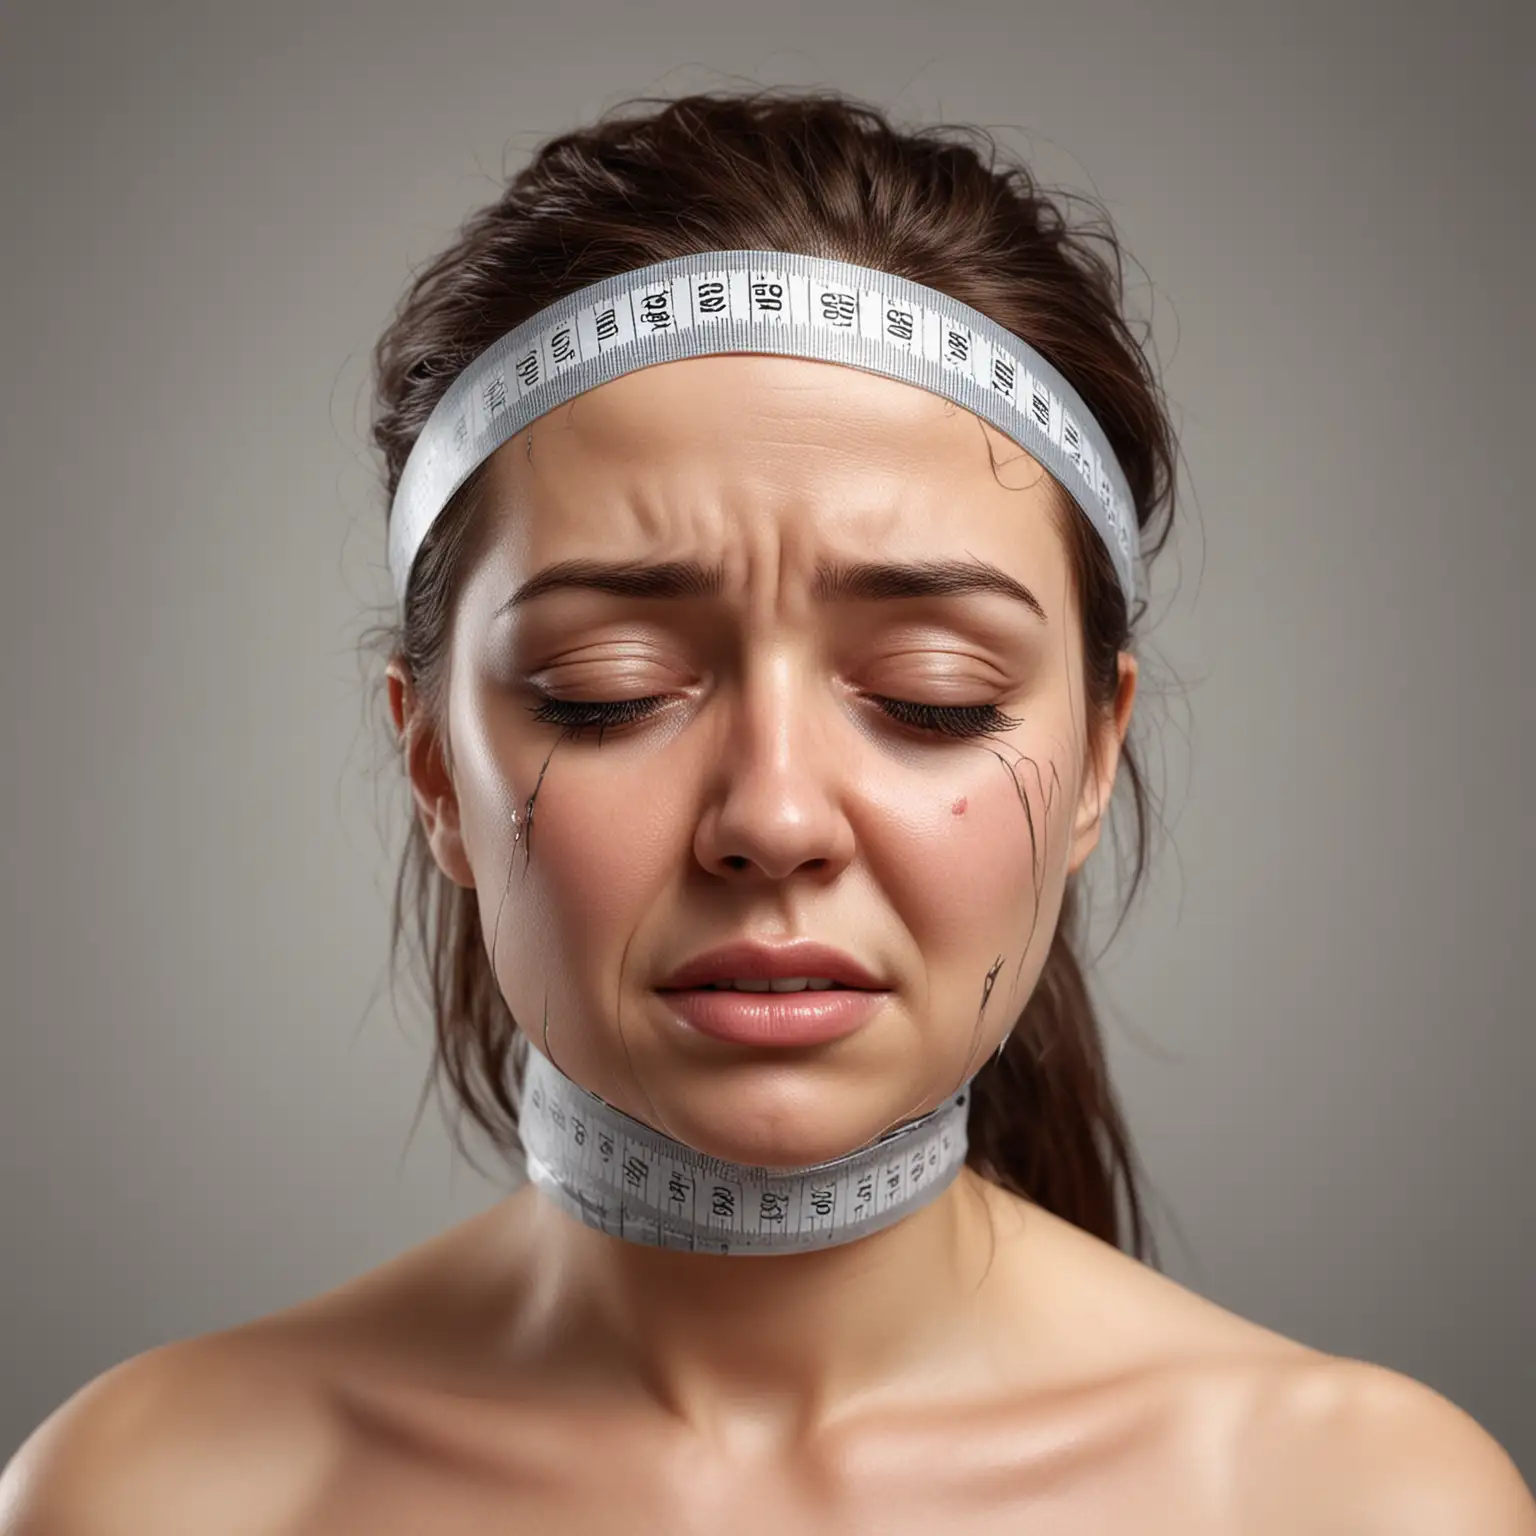 Realistic woman head is wrapped by measuring tape, she is unhappy and been crying

